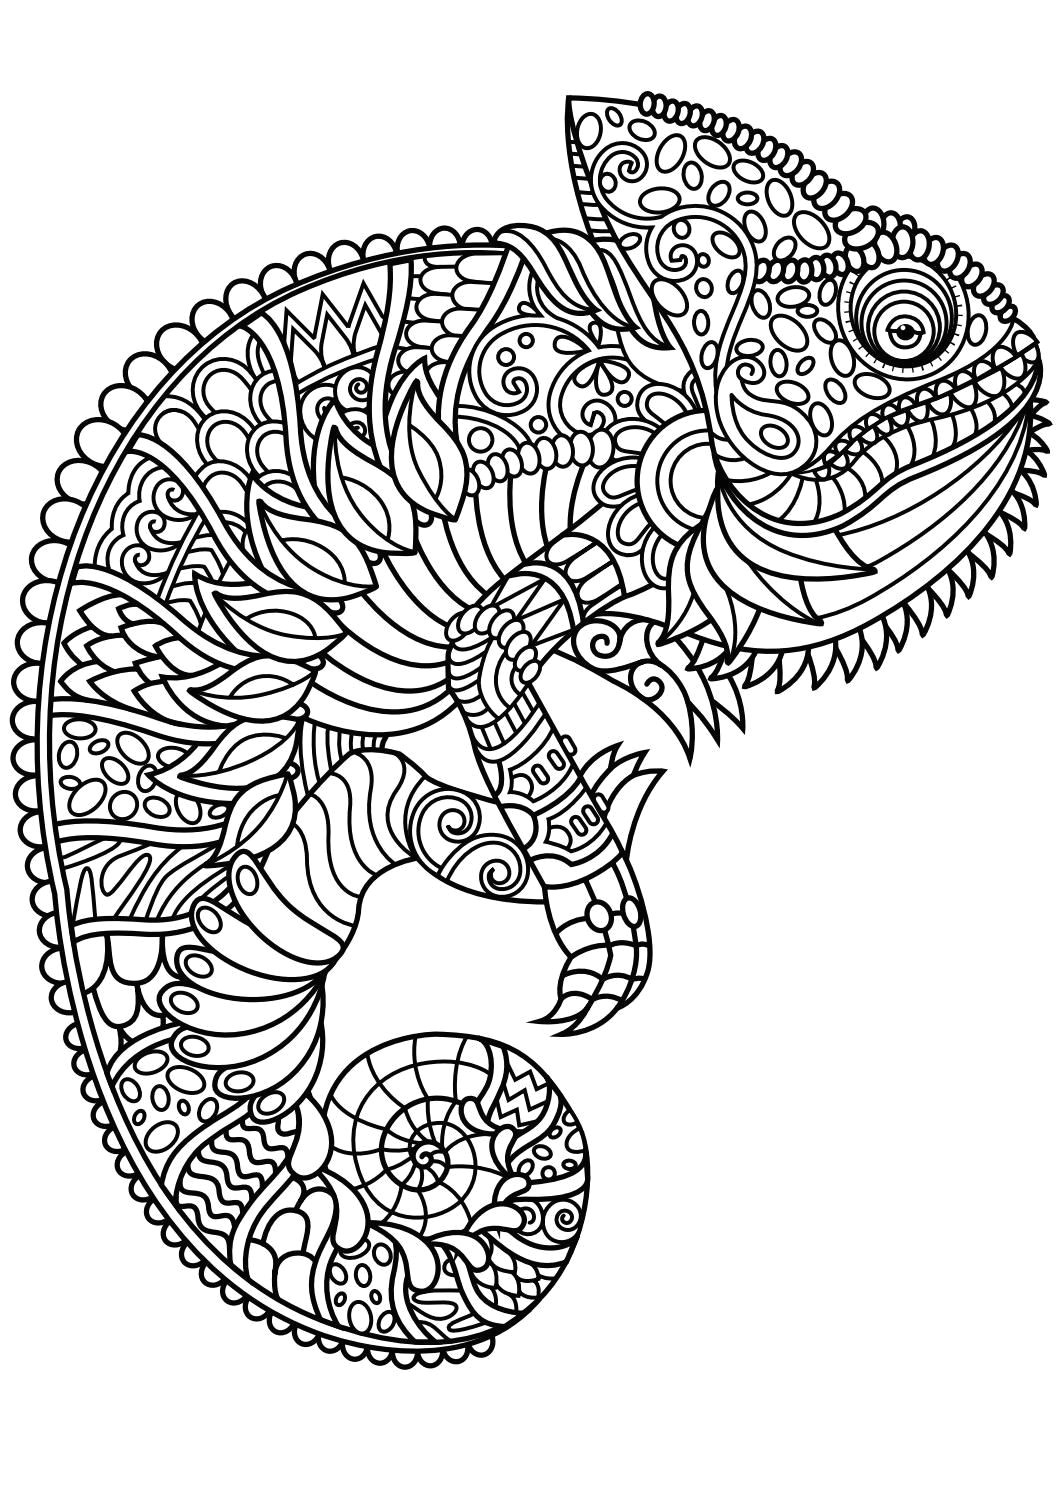 animal coloring pages pdf animal coloring pages is a free adult coloring book with 20 different animal pictures to color horse coloring pages dog cat